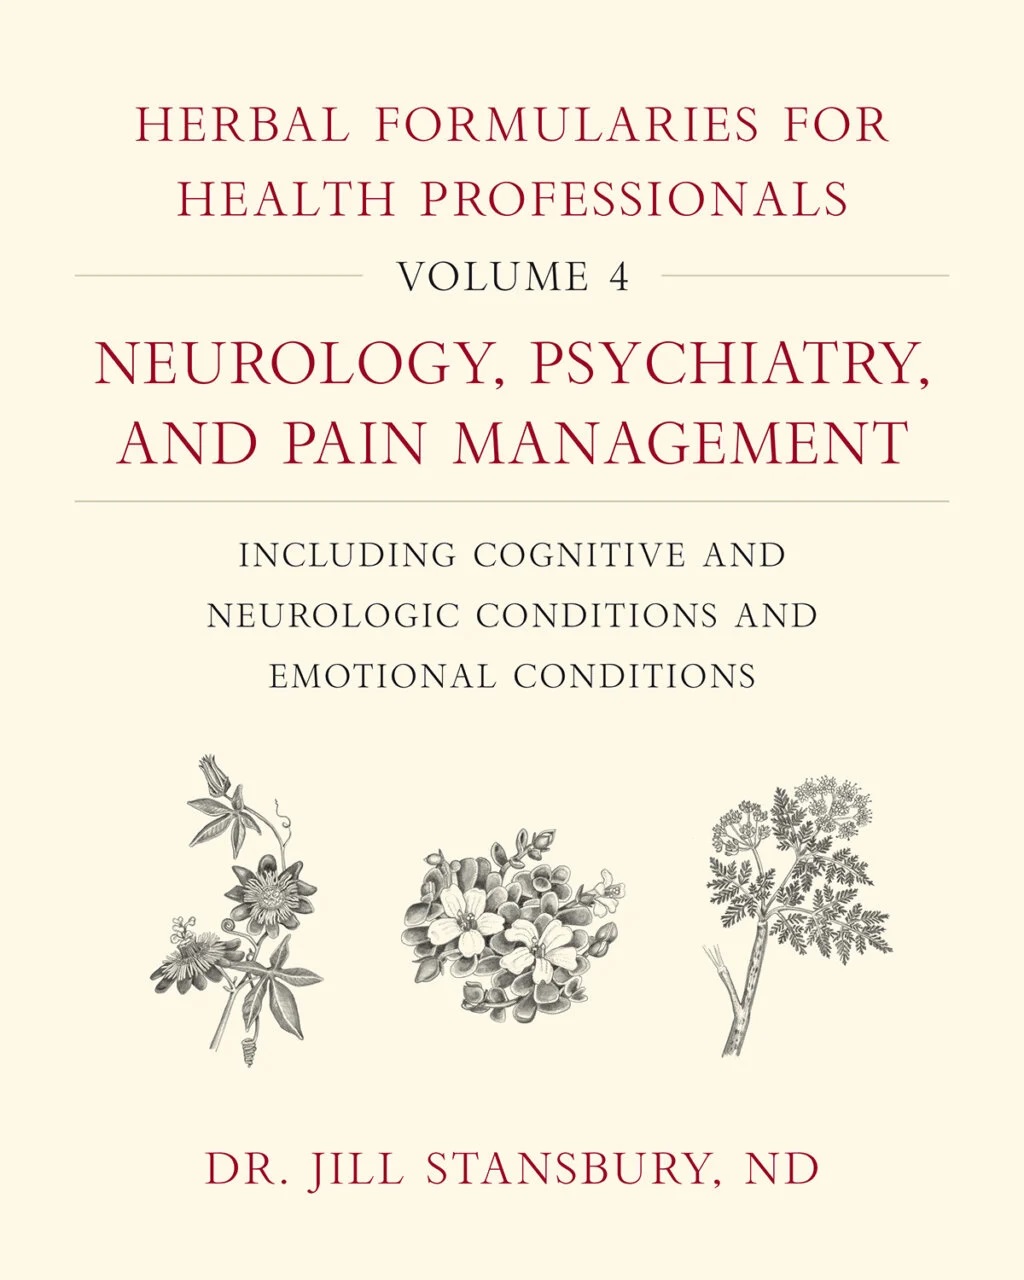  Herbal Formularies for Health Professionals, Volume 4:  Neurology, Psychiatry, and Pain Management